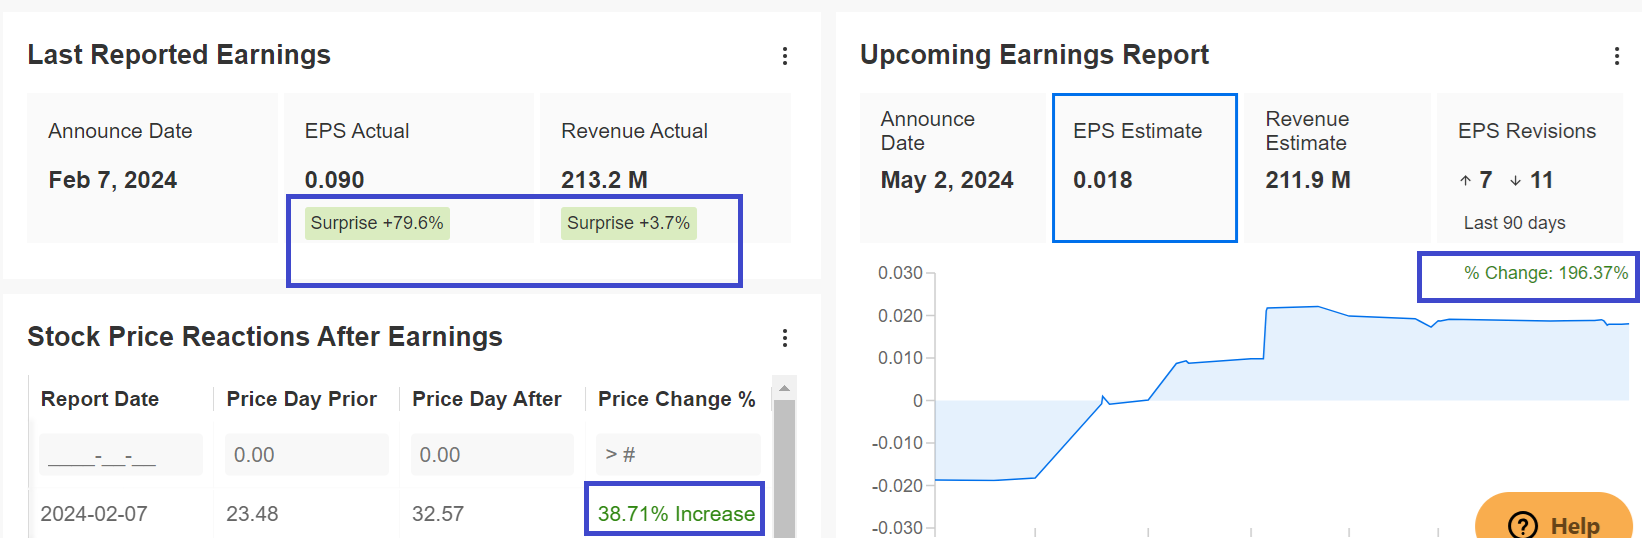 Previous and Next Earnings